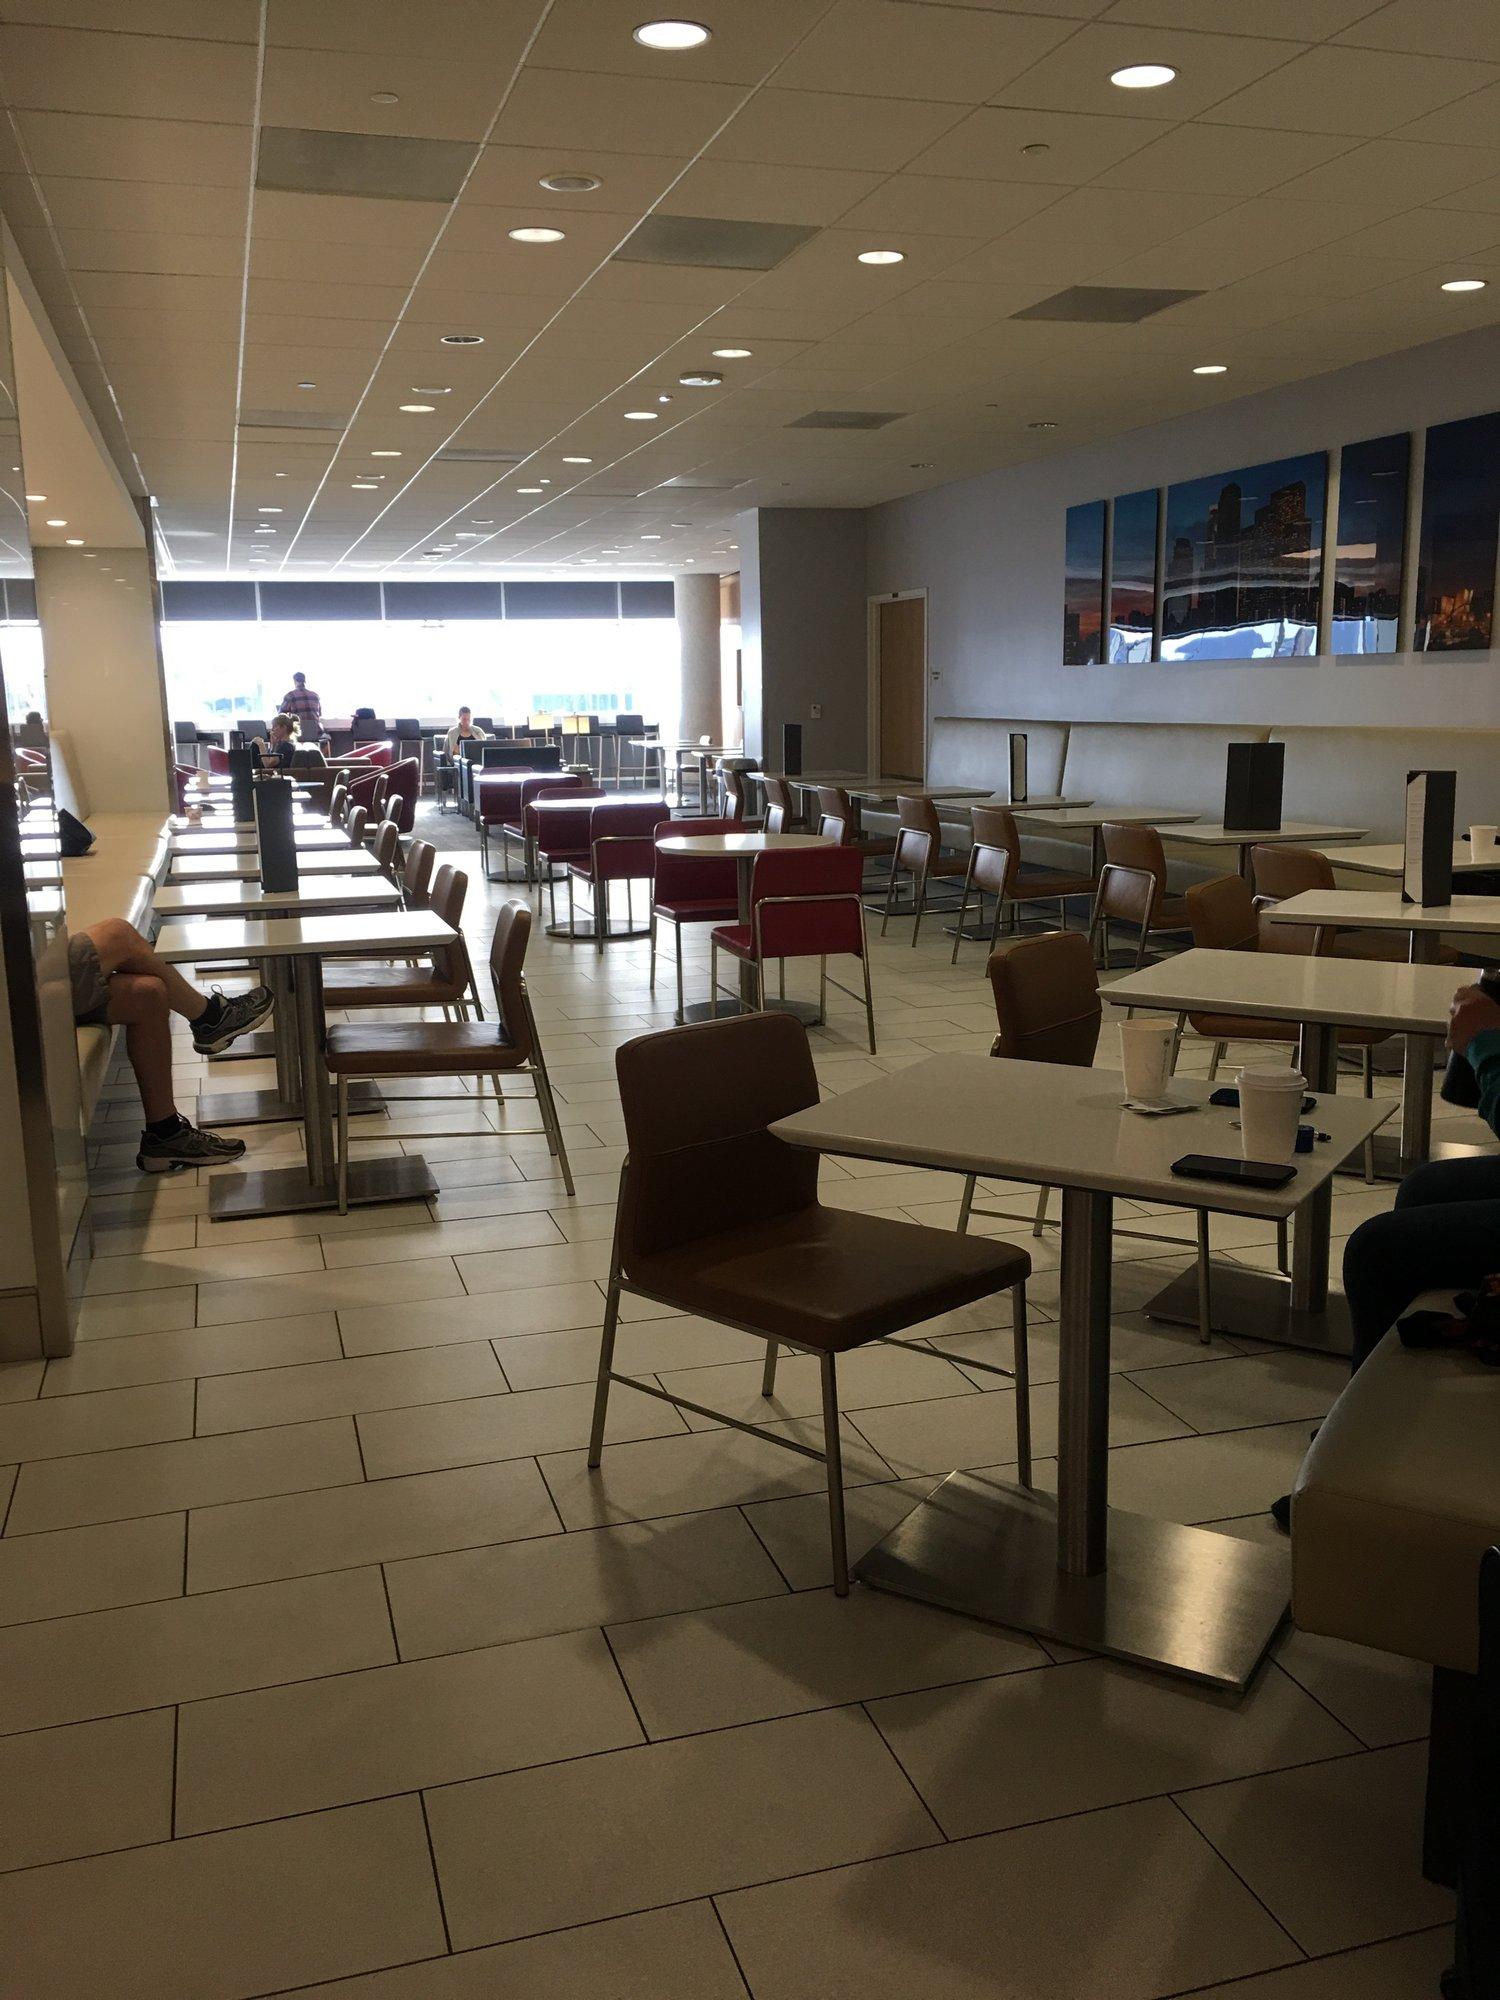 American Airlines Admirals Club image 3 of 38